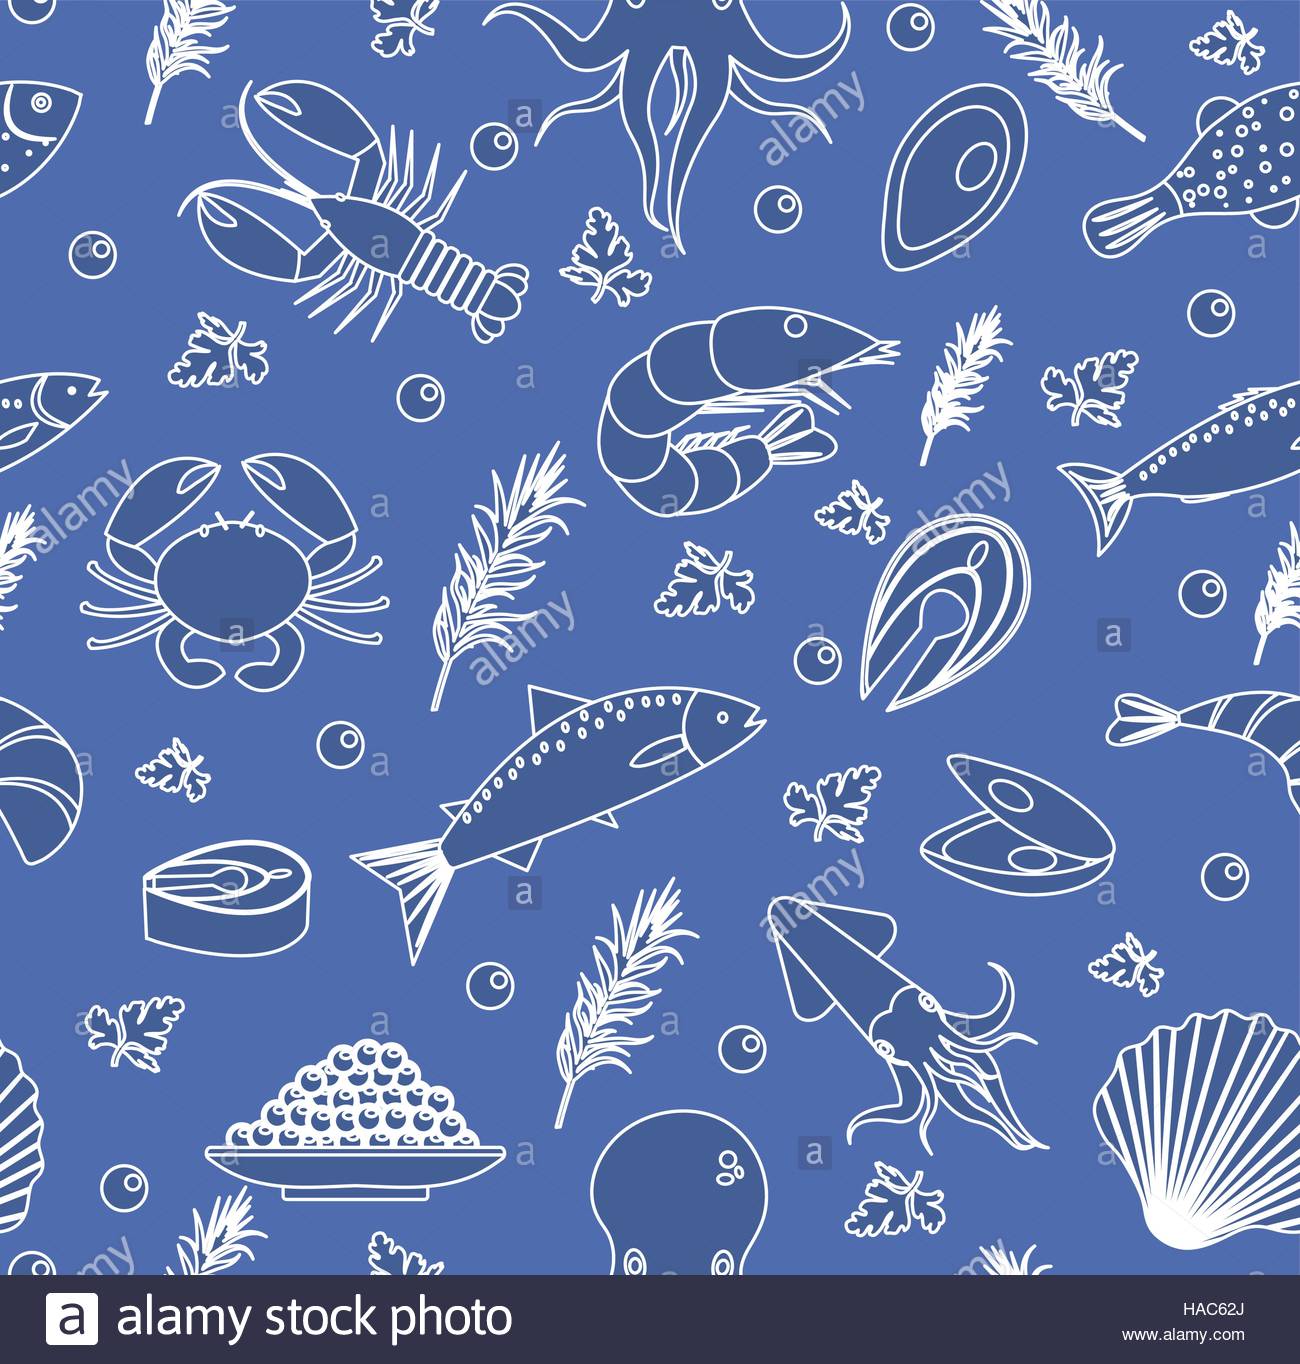 Seafood Seamless Pattern Fish Food Endless Background Texture